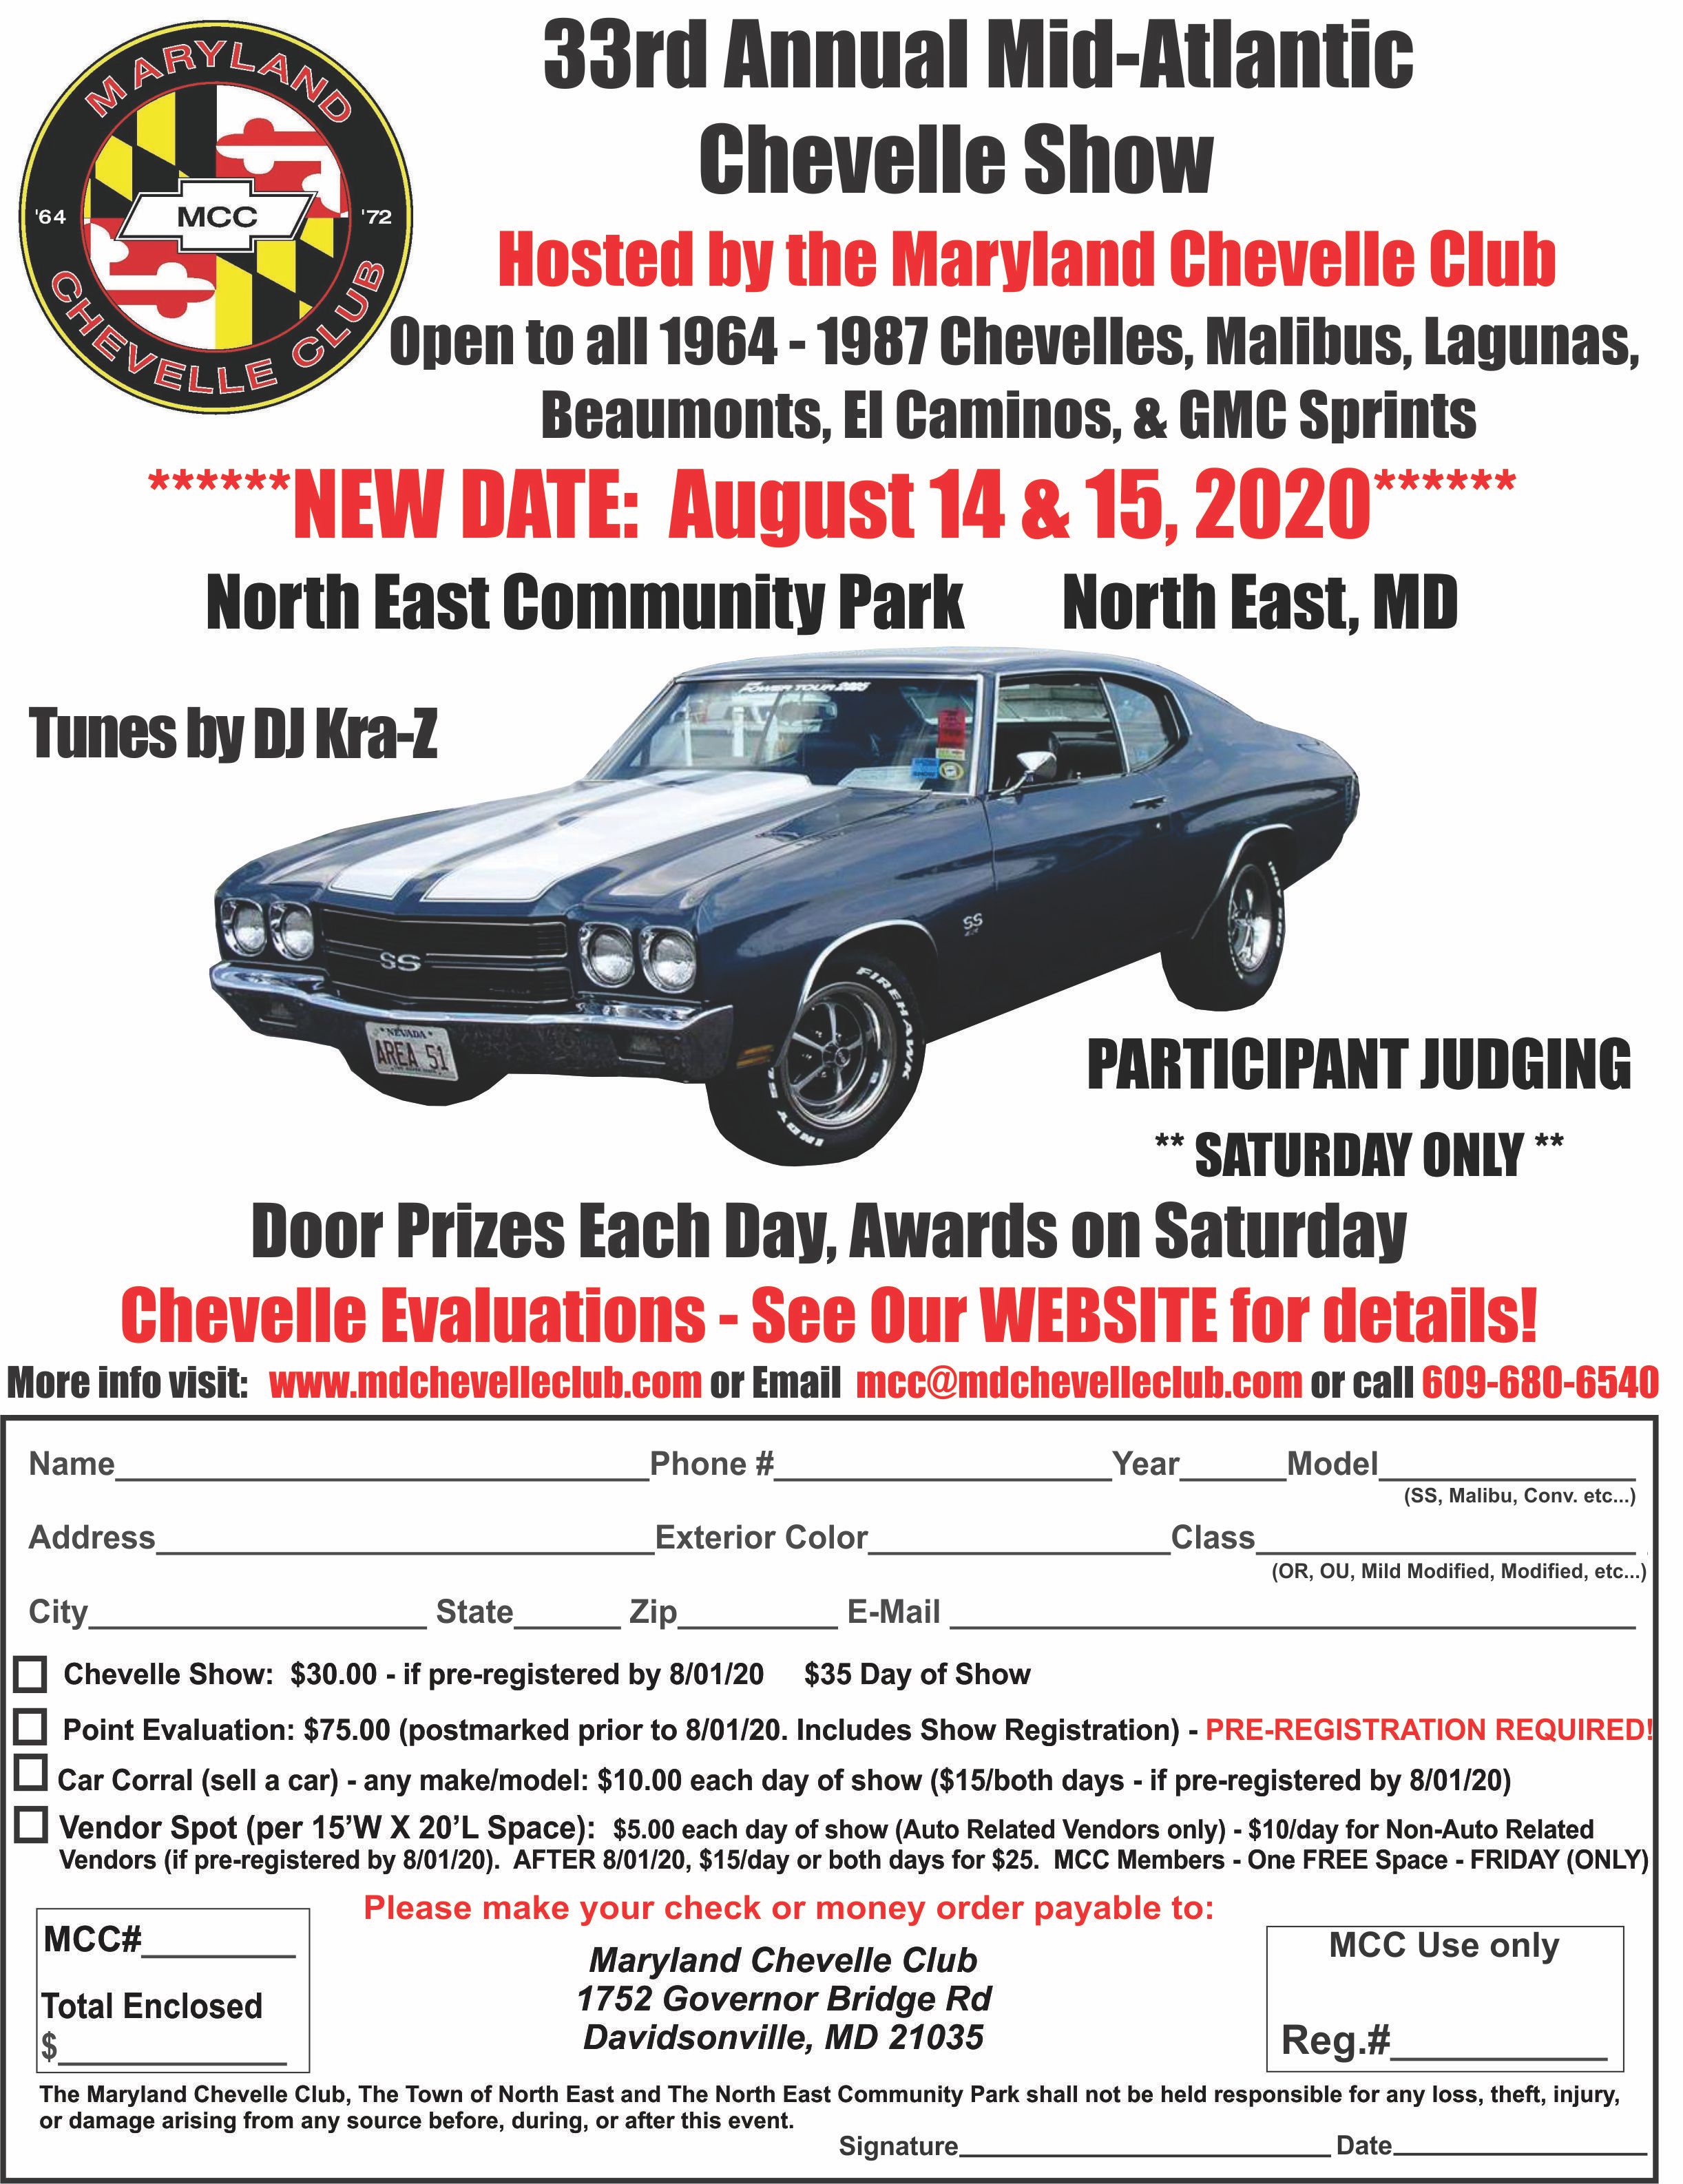 2020 33rd Annual Mid-Atlantic Chevelle Show August 14th and 15, 2020